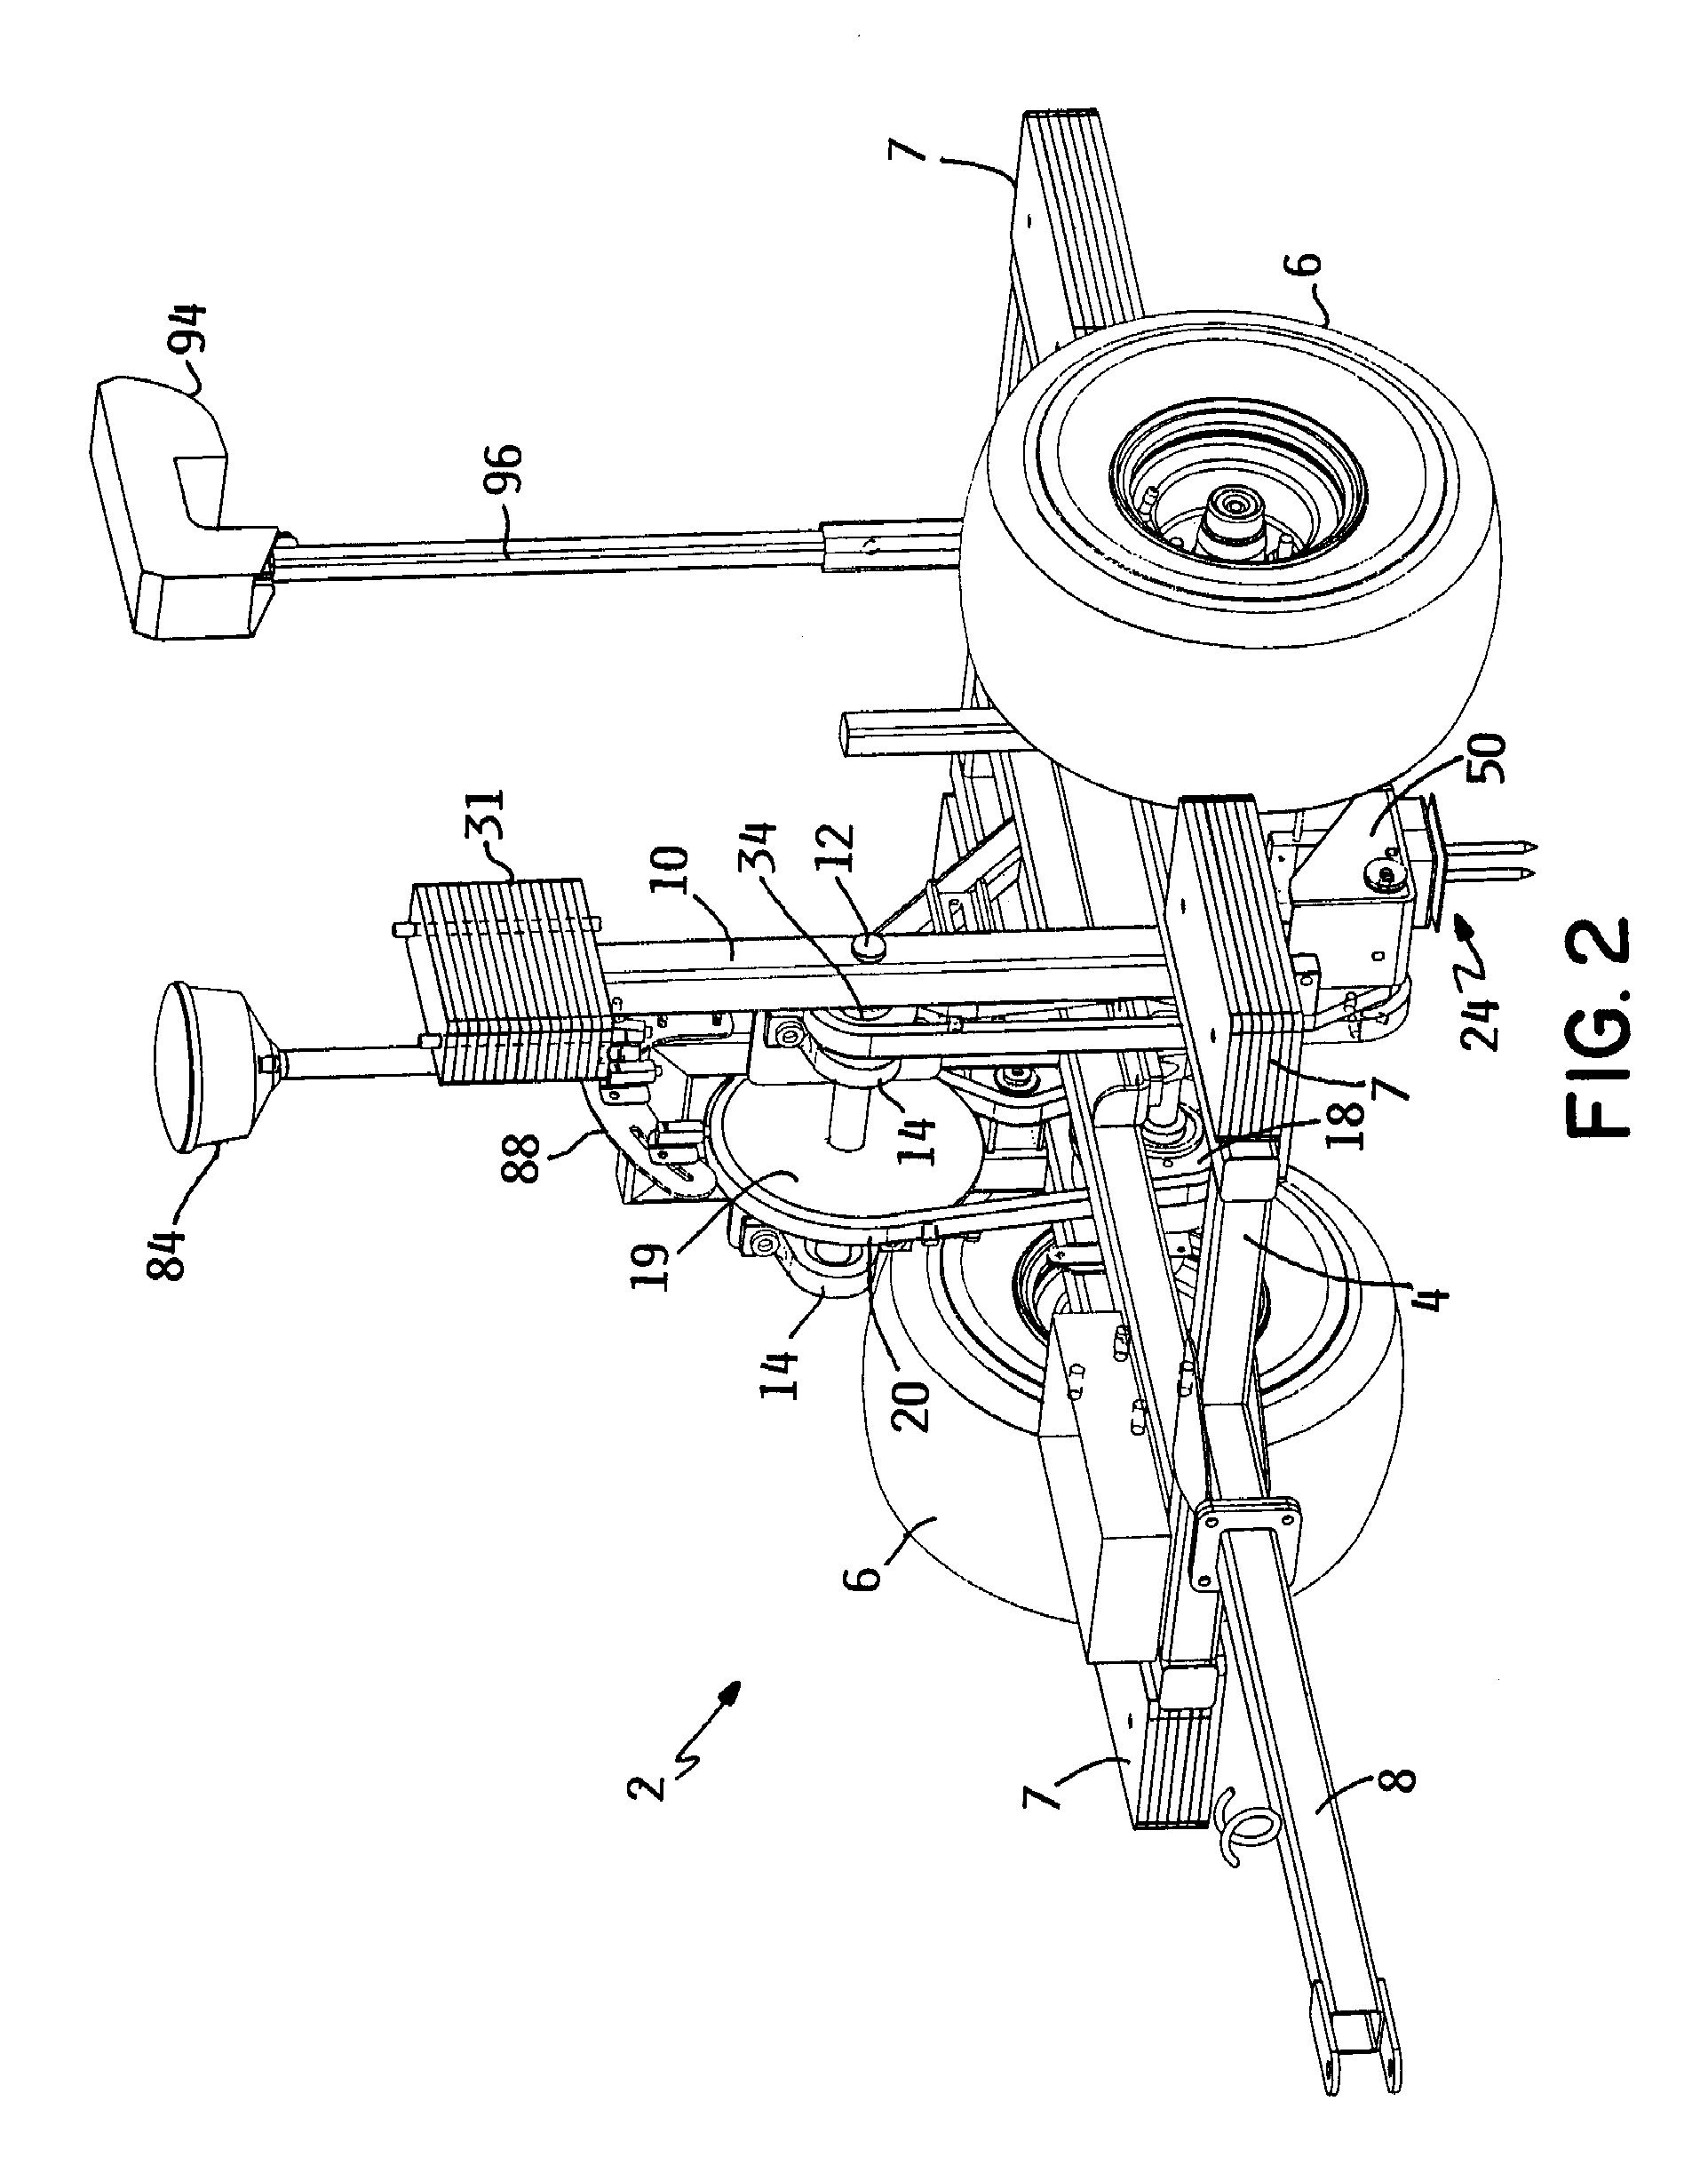 Mobile turf instrument apparatus having droppable hammer type accelerometer carried on rotating arm